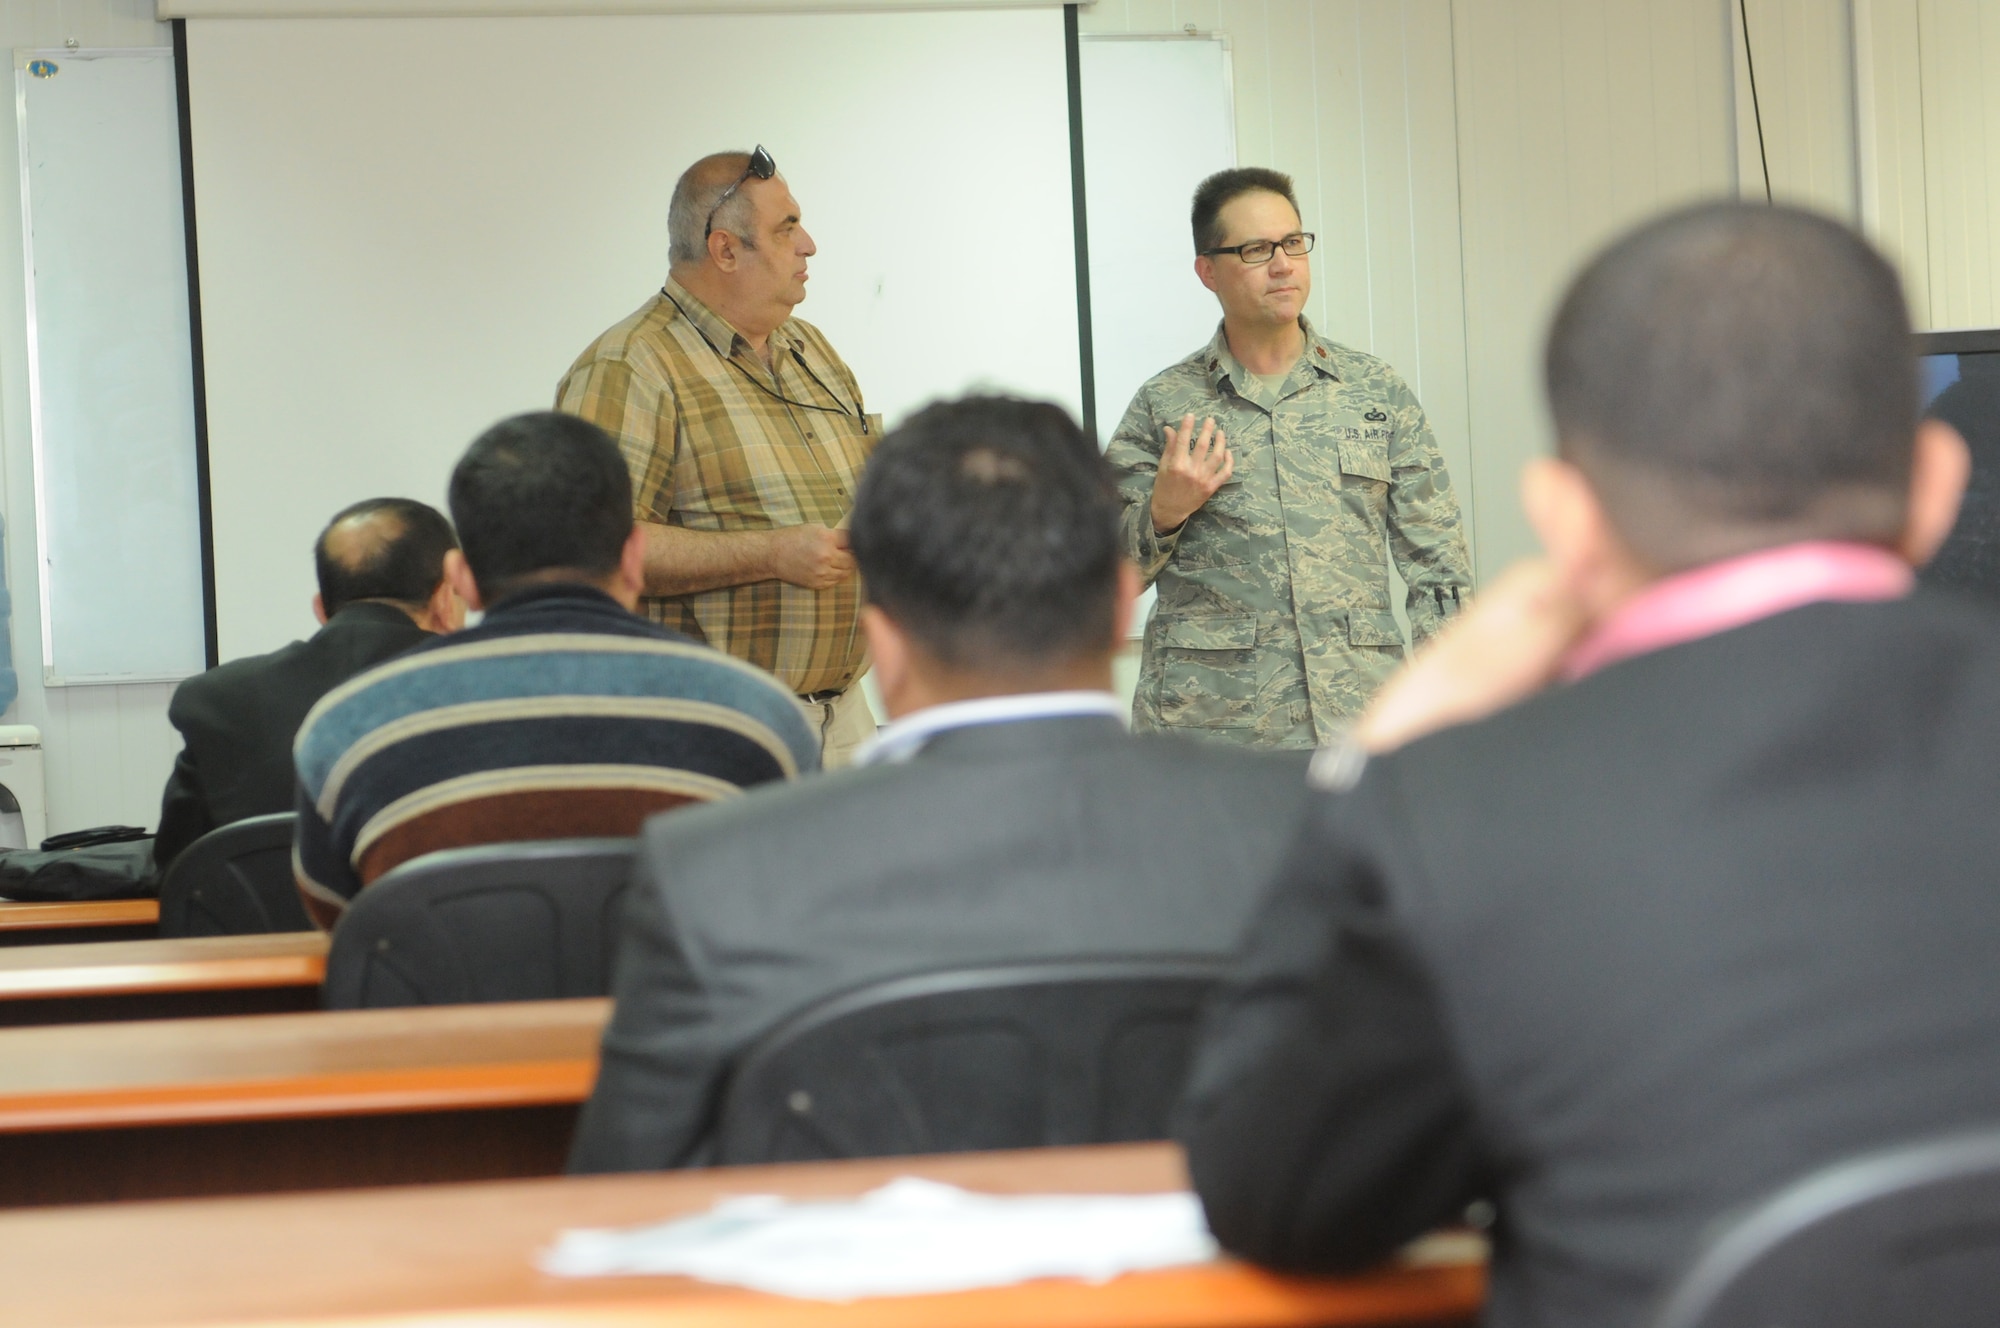 BAGHDAD - Maj. Jose A. Cardenas, 445th Airlift Wing Public Affairs, currently deployed as the Deputy Public Affairs Officer to the Deputy Commanding General for Advising and Training, serves as a guest lecturer during the Iraqi Ministry of Defense’s Advanced Broadcasting and Television Production Workshop conducted at the MoD’s Ministerial Developmental and Training Center here Feb. 28. Major Cardenas works in his civilian profession as a professor with the Department of Telecommunications at Bowling Green State University in Bowling Green, Ohio. (U.S. Army photo/Spc. Breeanna DuBuke)